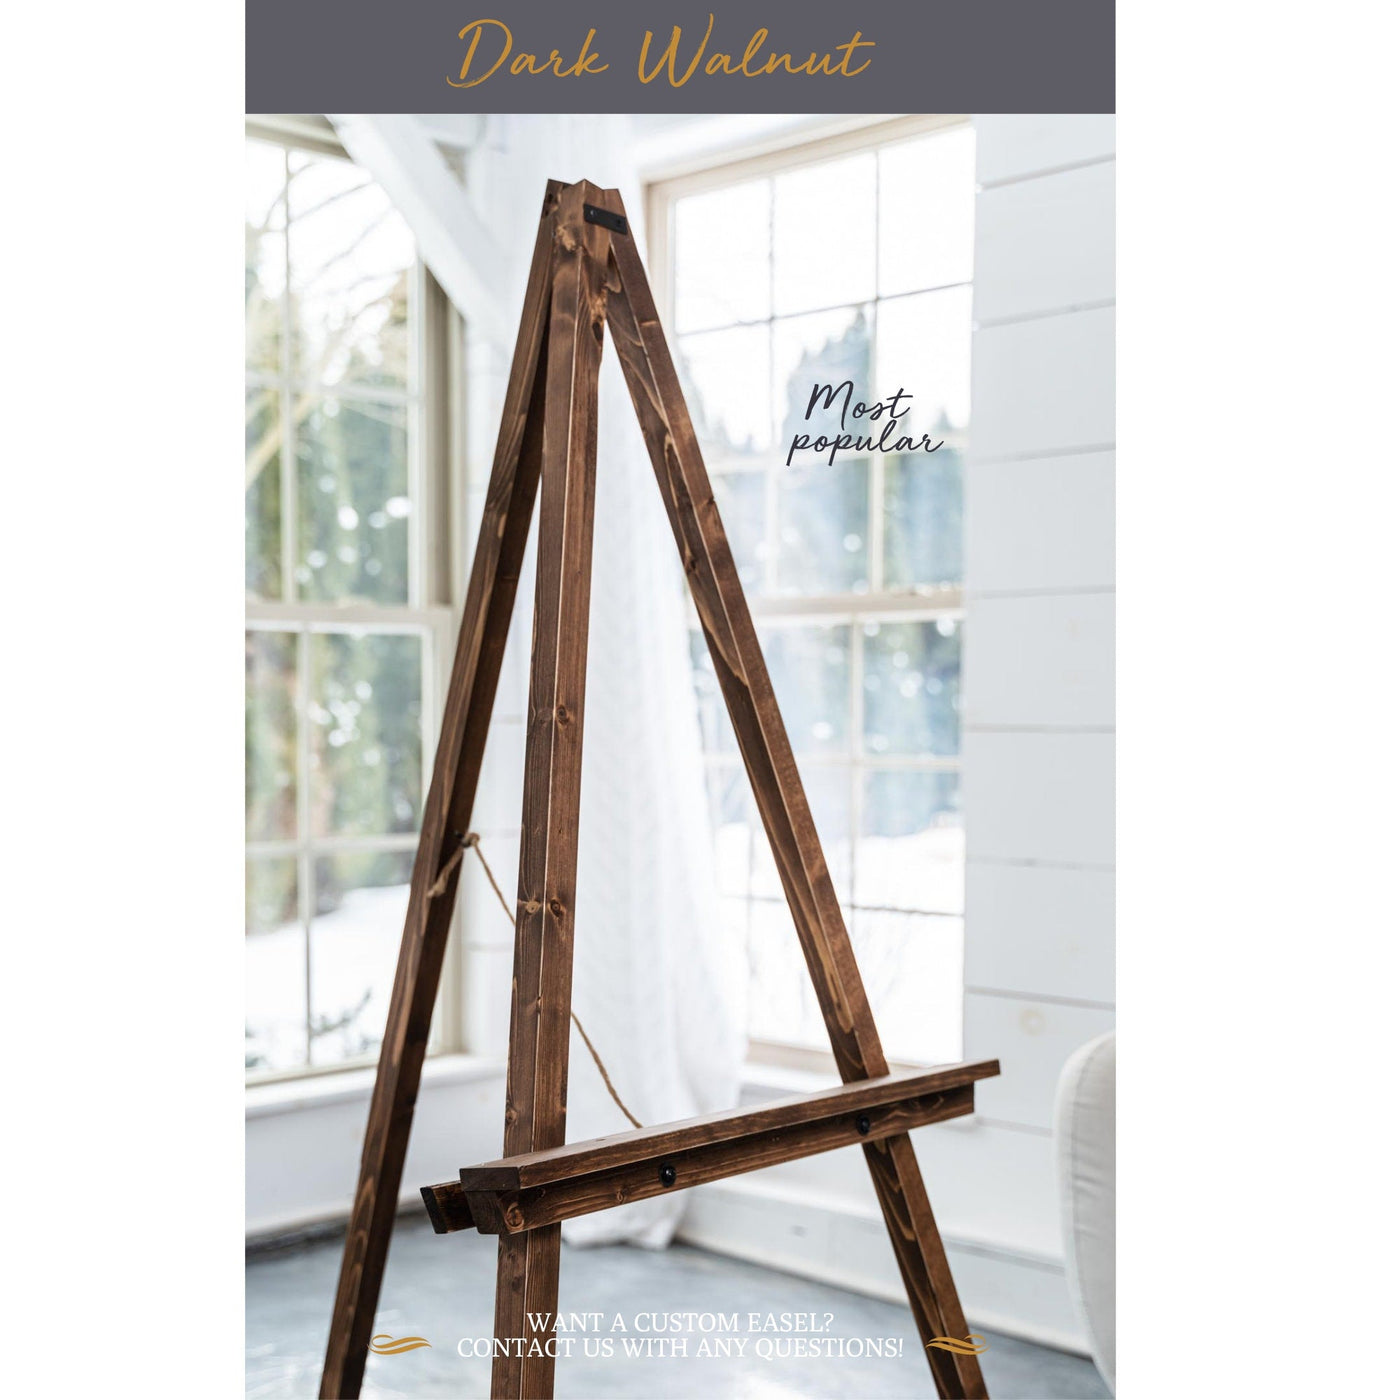 WOODEN EASEL STAND